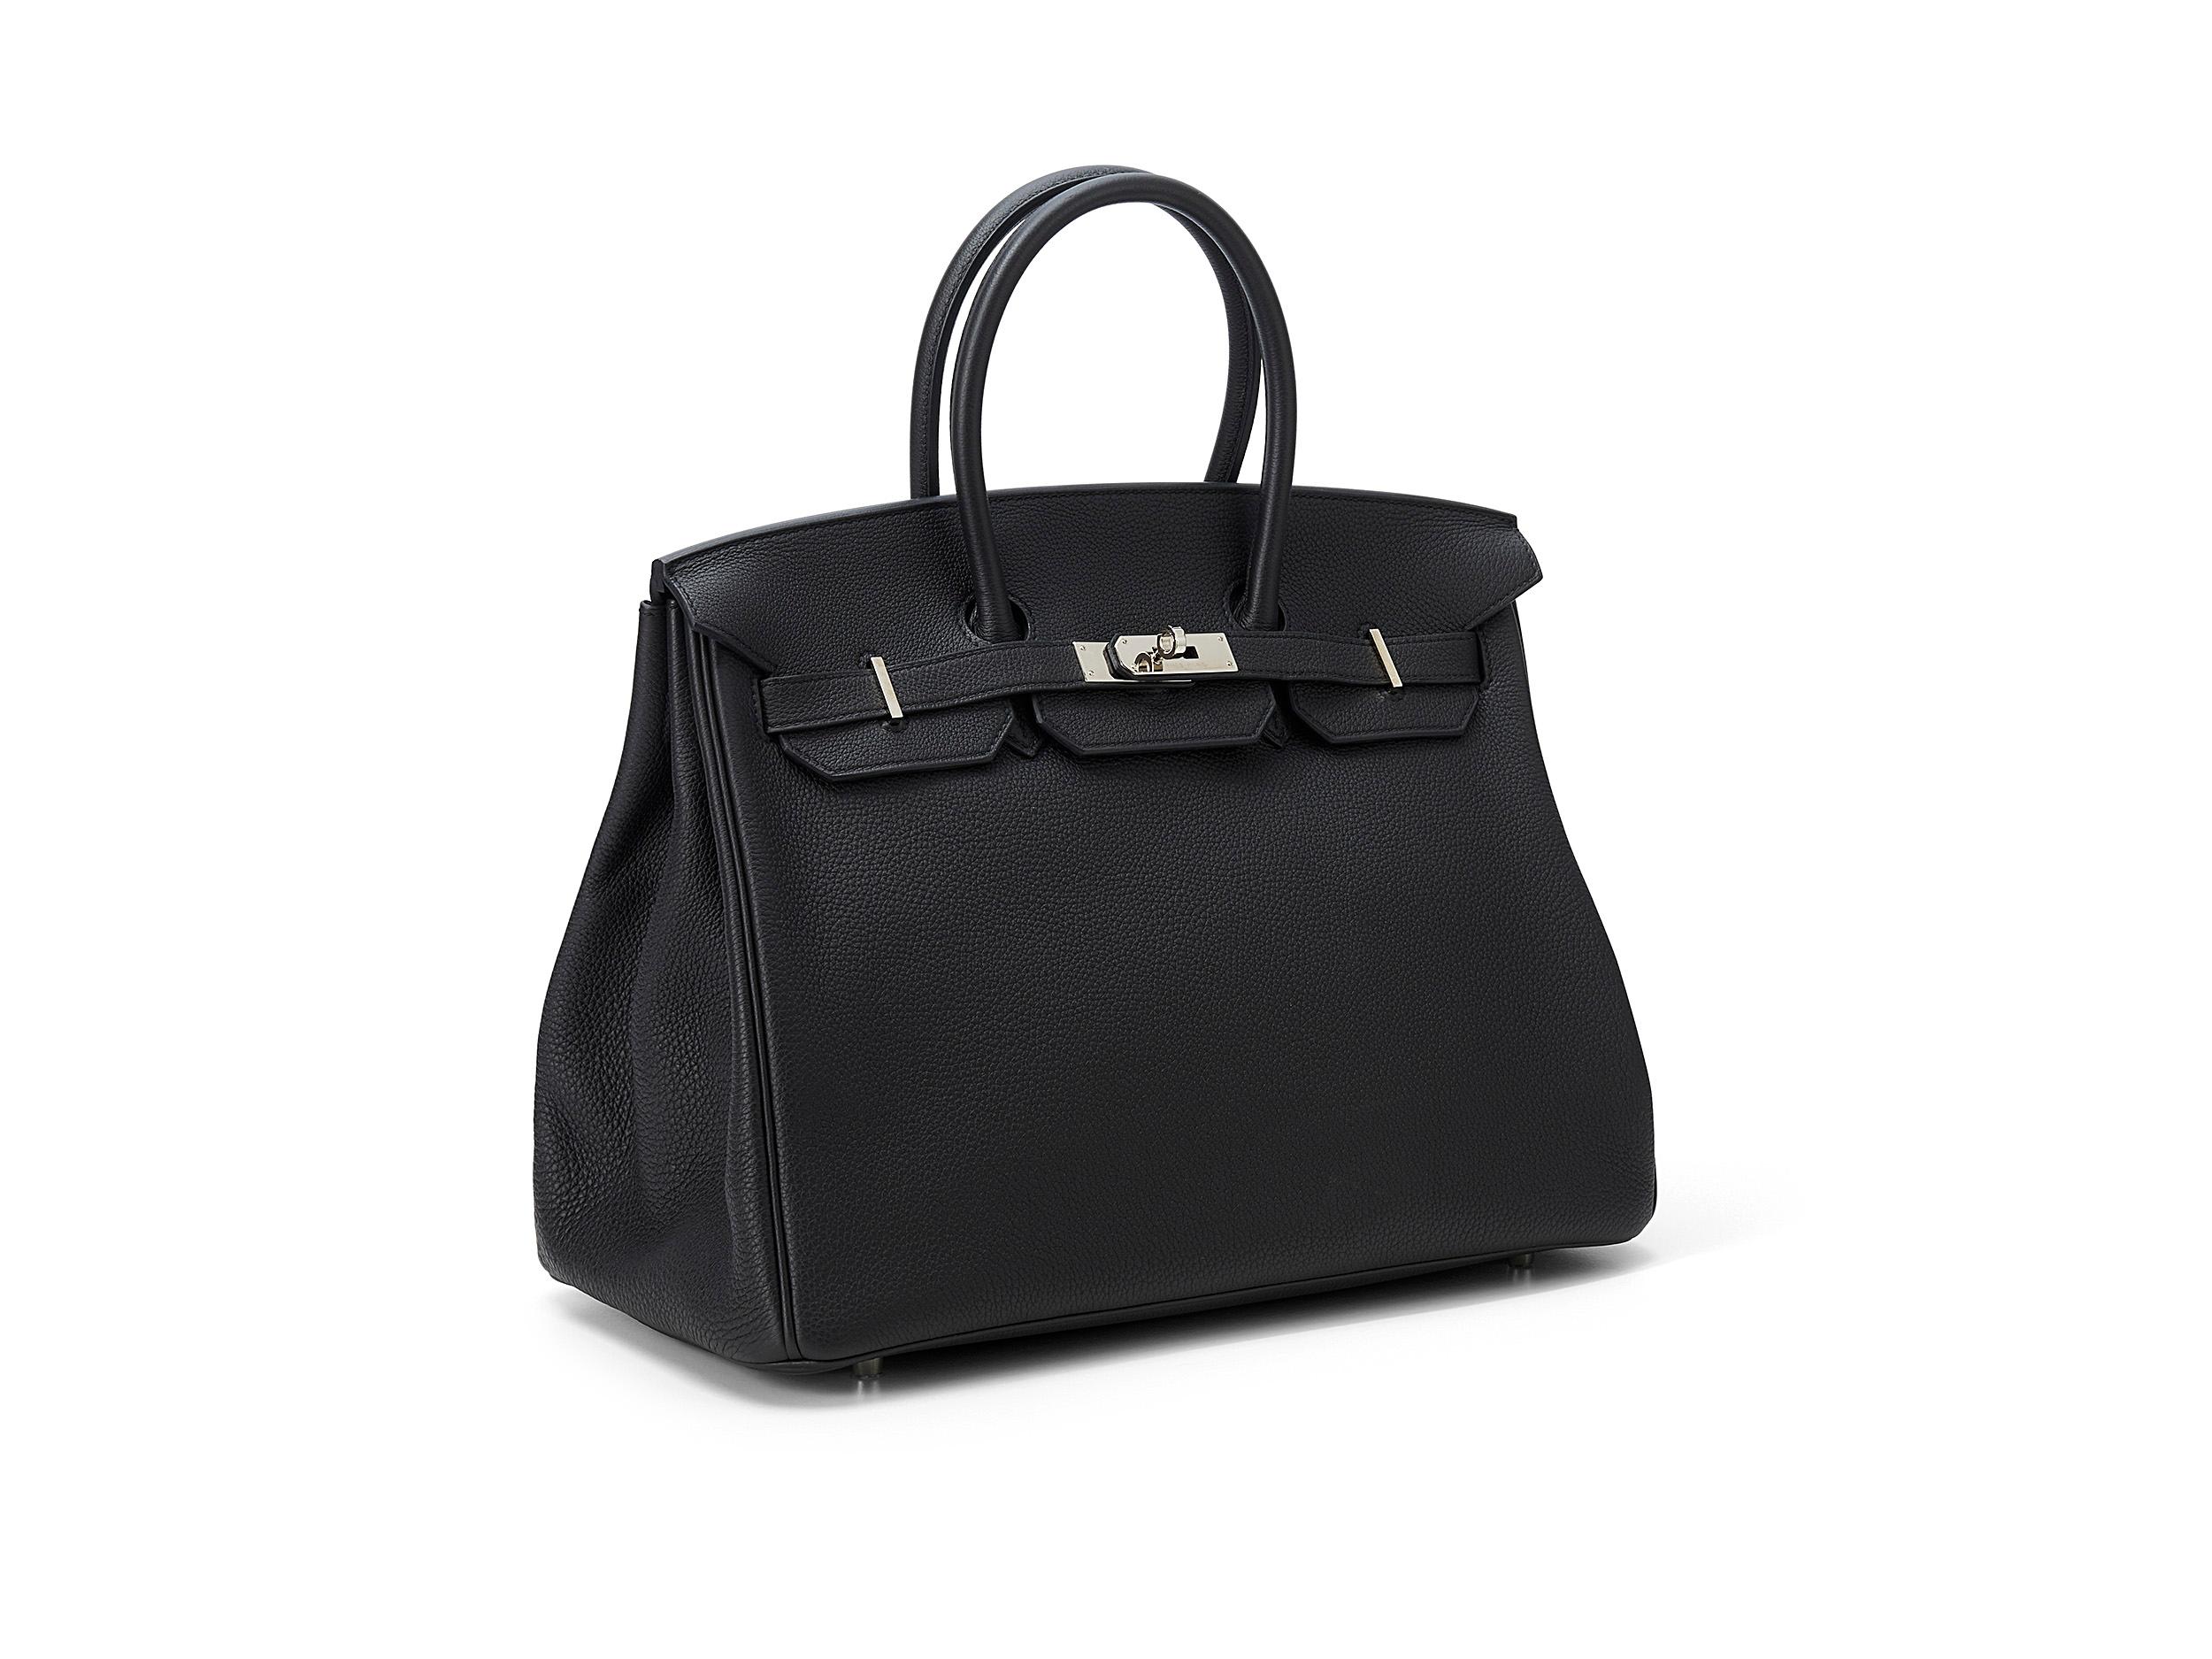 Hermès Birkin 35 in noir and togo leather with palladium hardware. The bag is in a good condition, the hardware and the lock have scratches and discoloration. Comes as full set including the original receipt. Stamp A (2017) 

